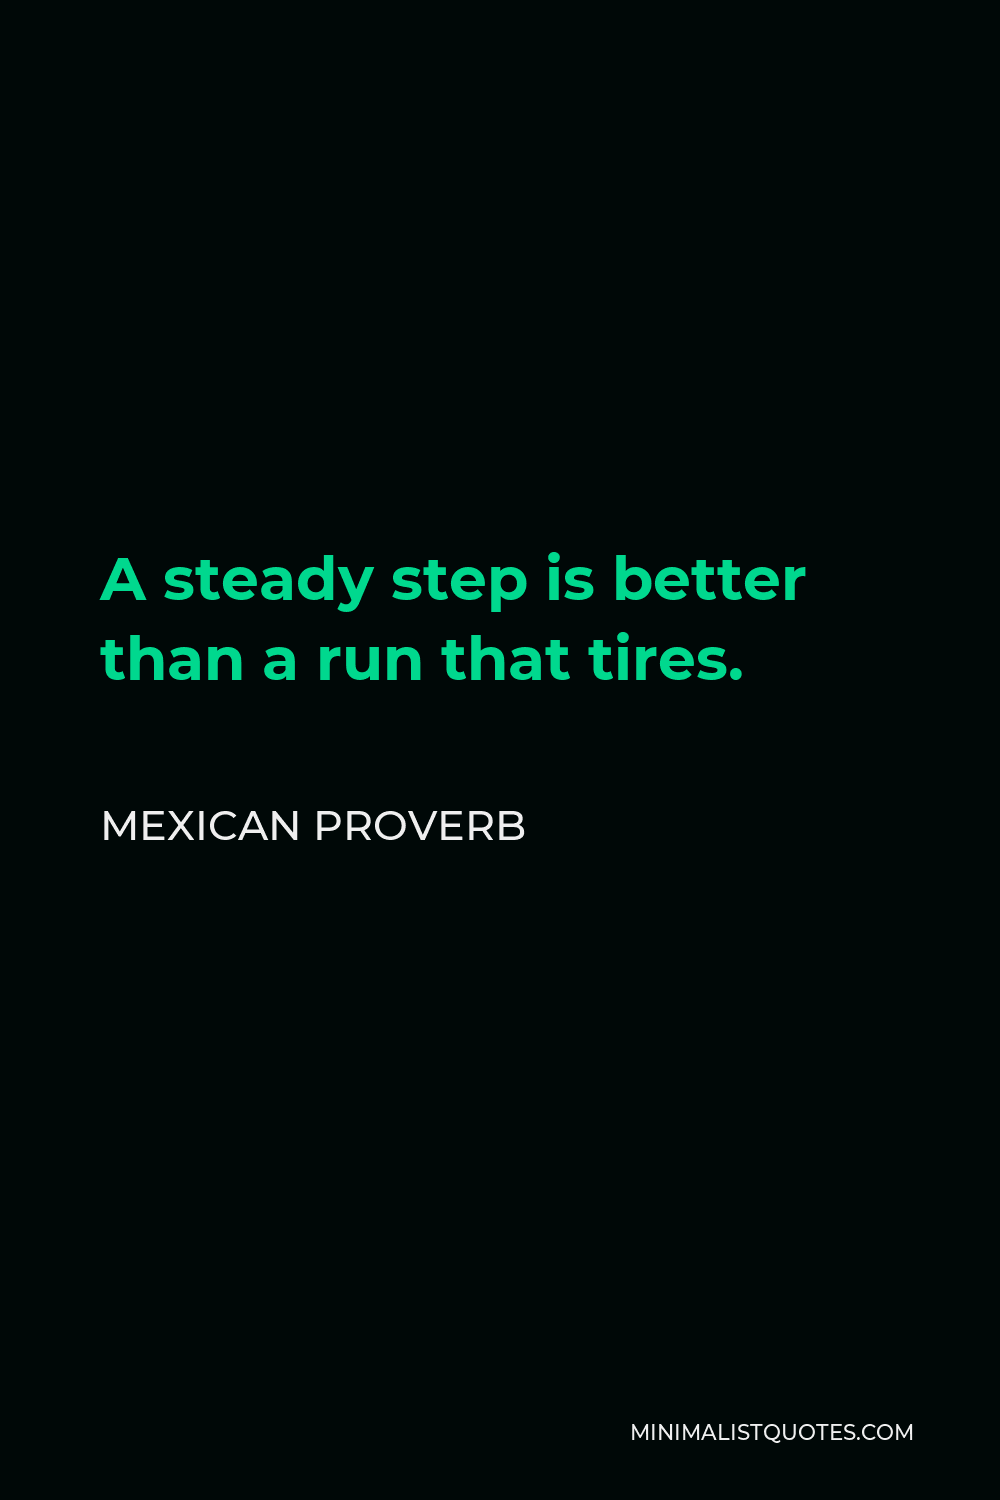 Mexican Proverb Quote - A steady step is better than a run that tires.